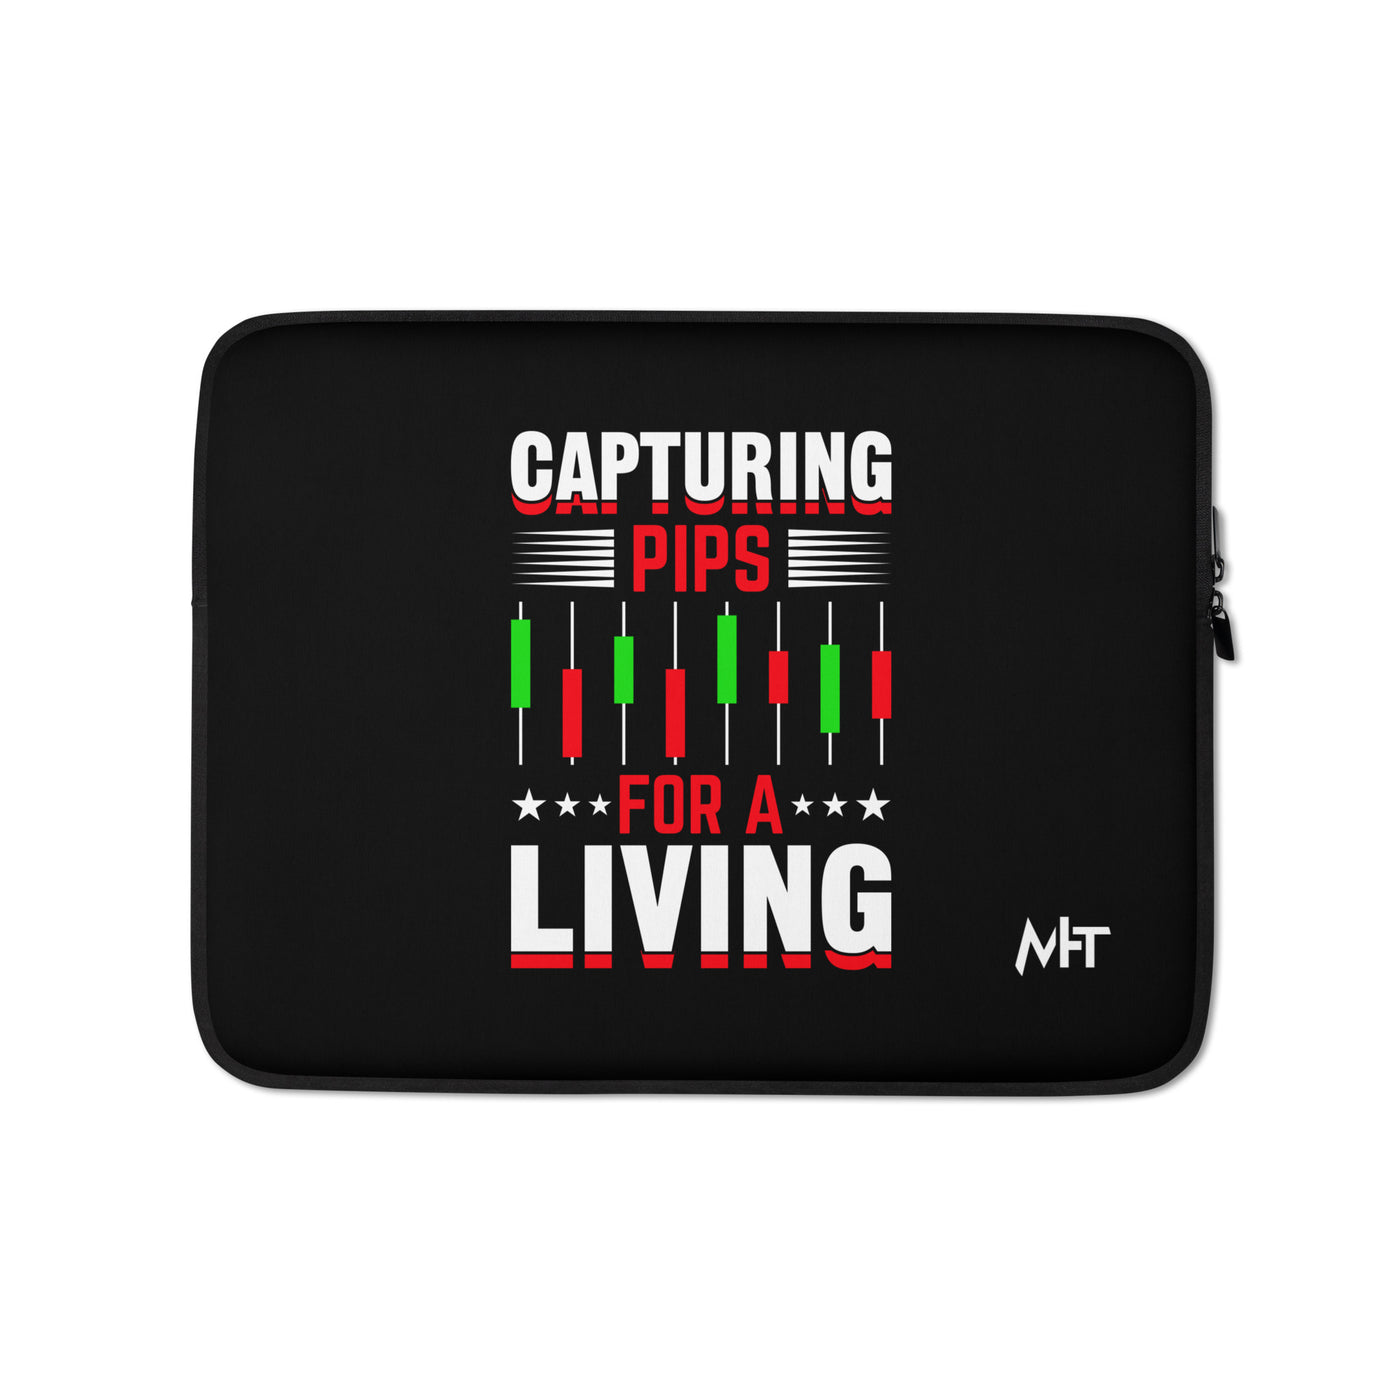 Capturing Pips for a Living - Laptop Sleeve